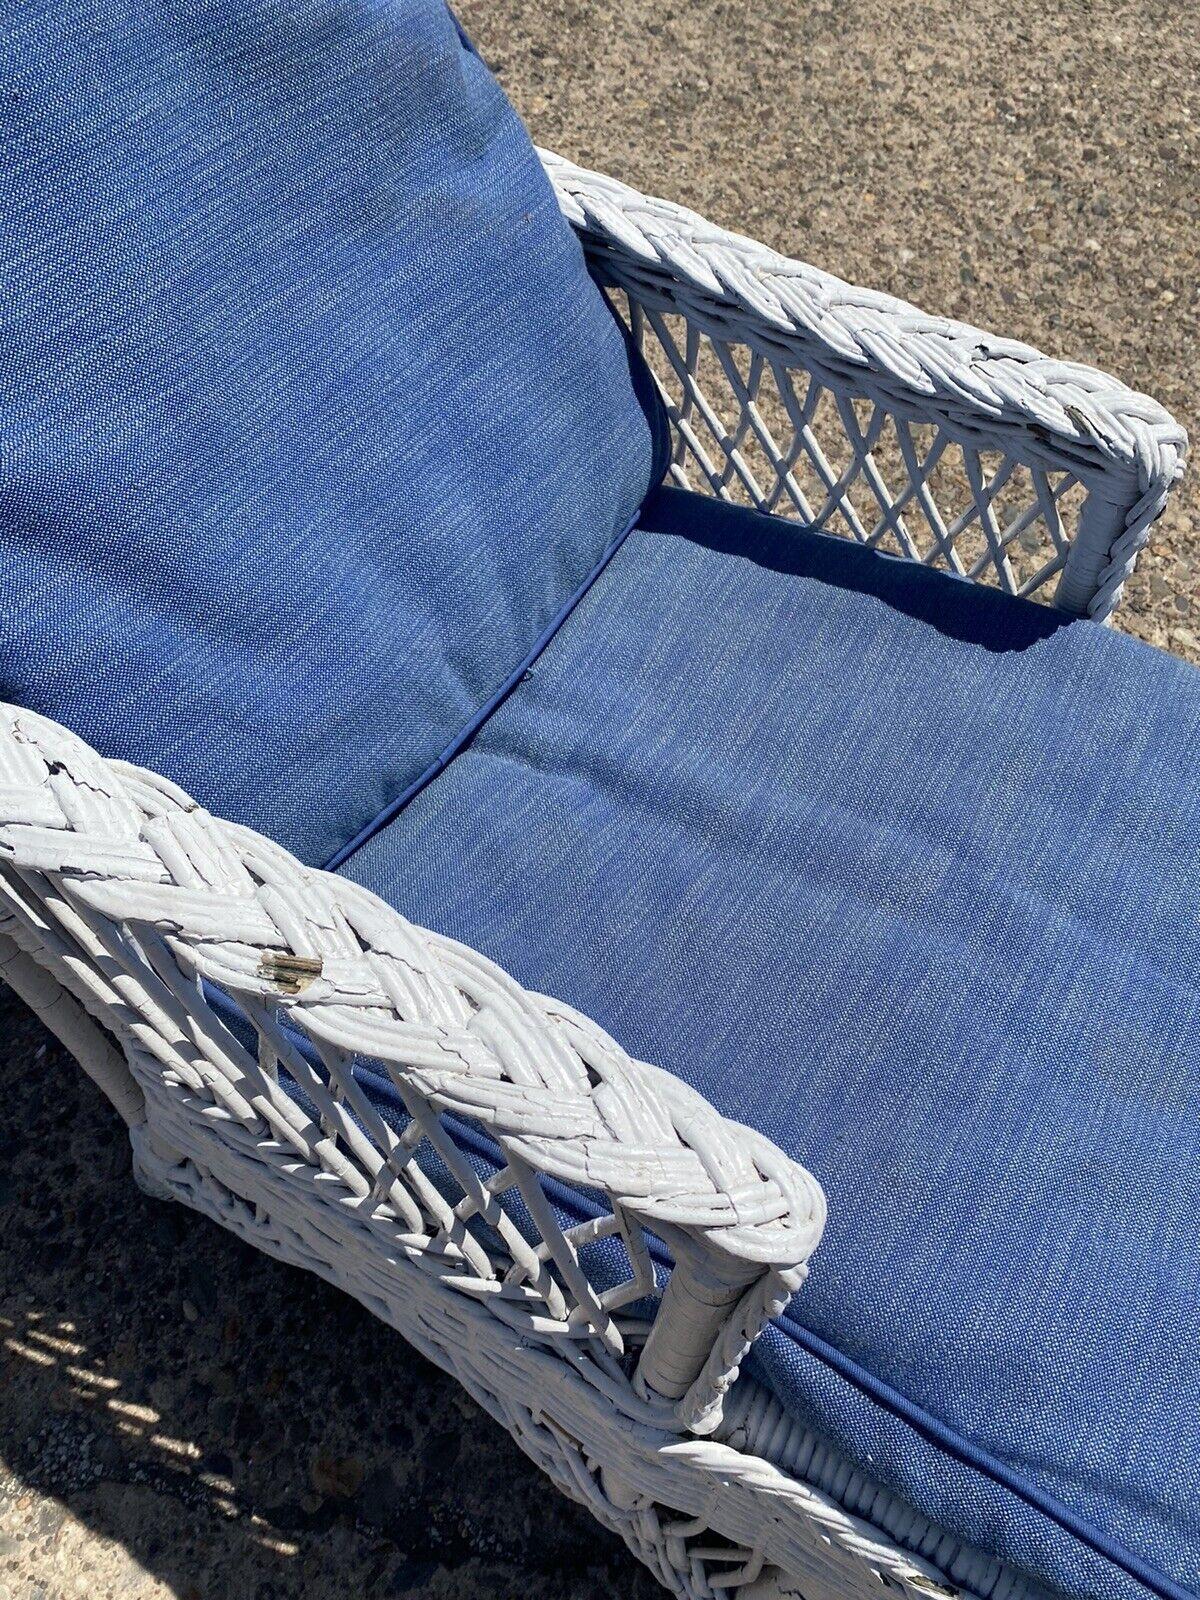 Antique American Victorian White Wicker Sunroom Chaise Lounge Arm Chair Sofa For Sale 4